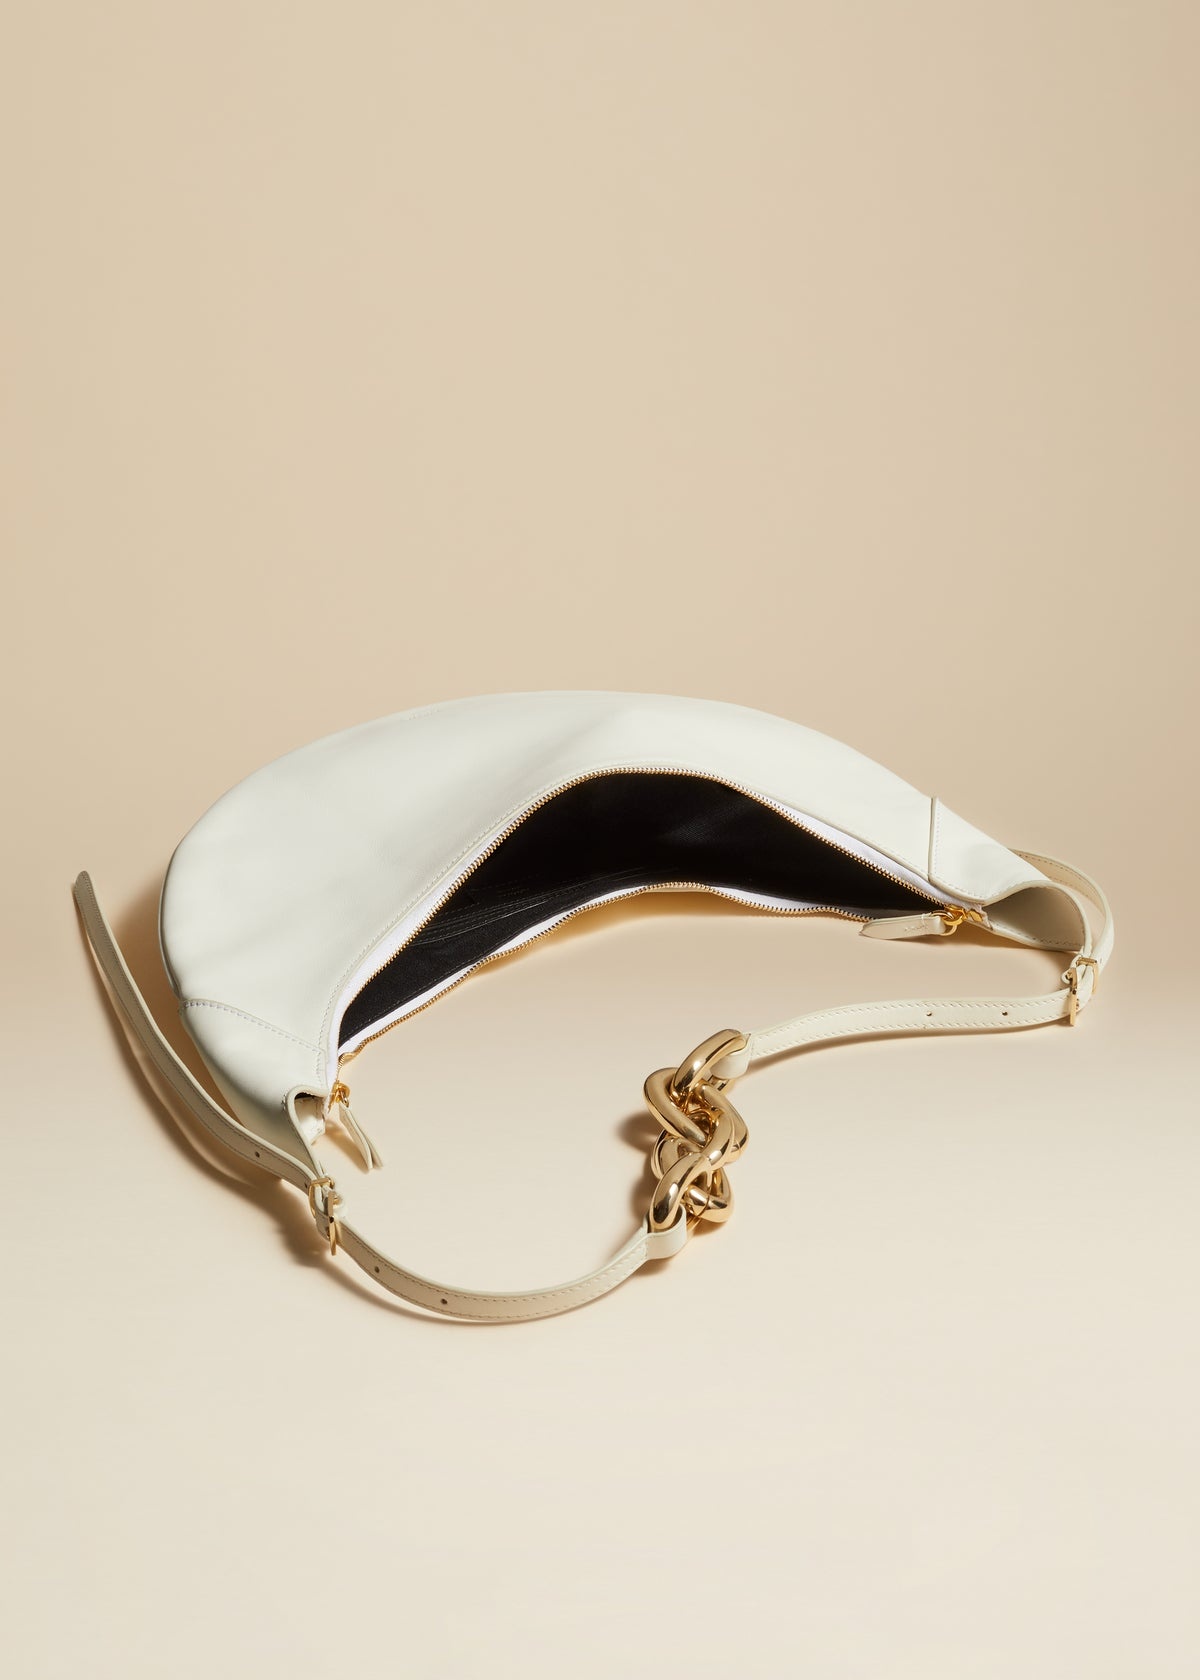 The Alessia Shoulder Bag in White Leather - 3